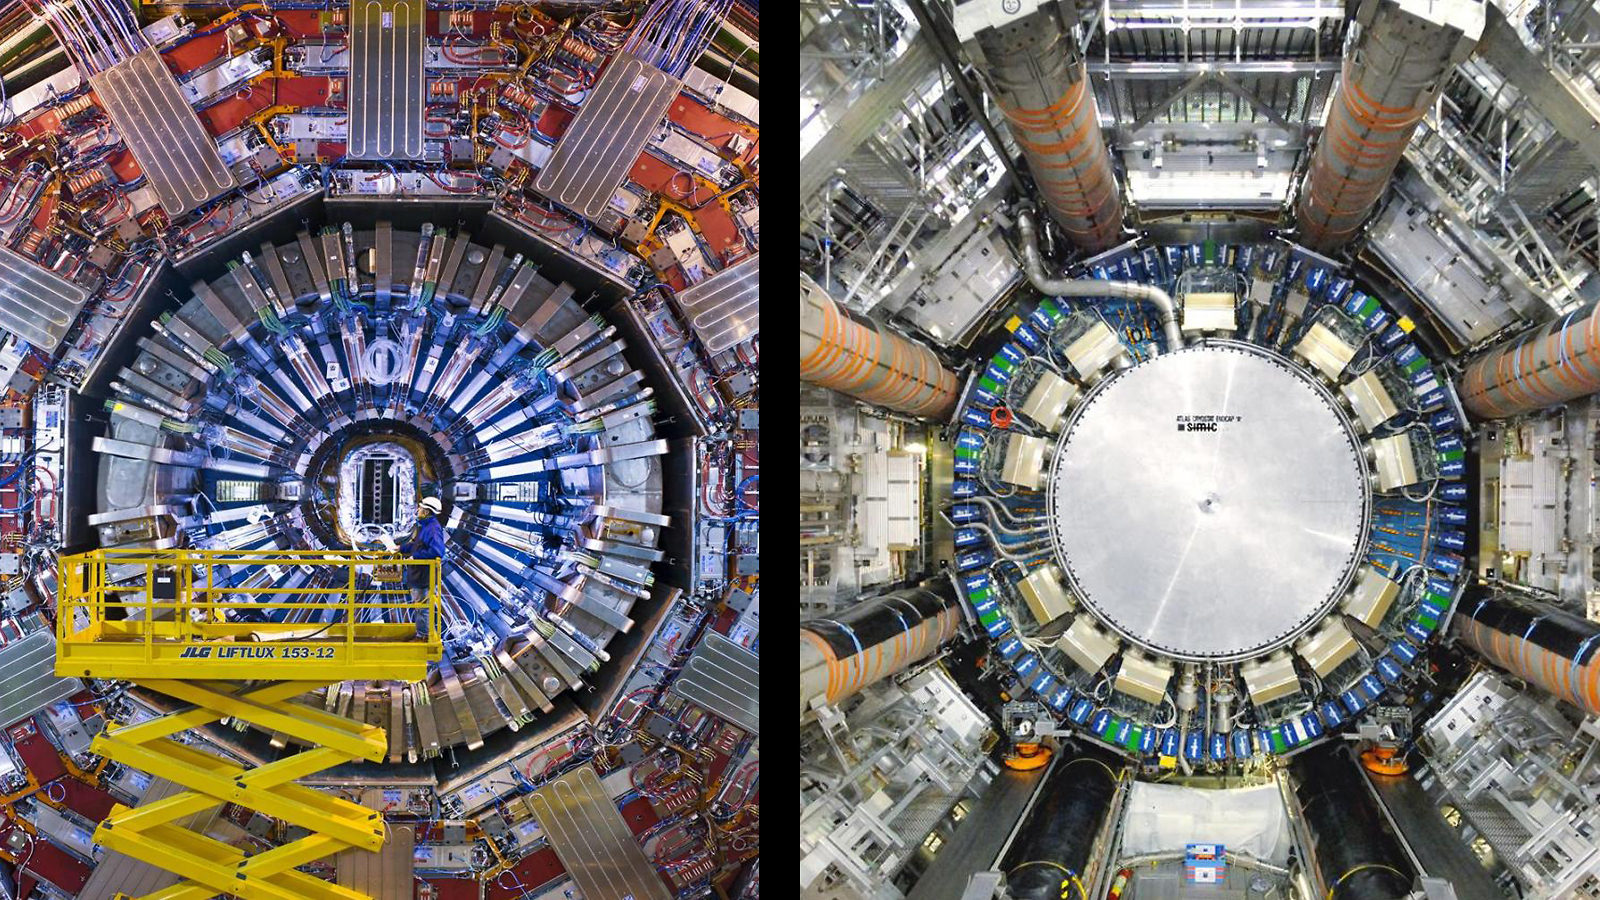 Photos in split screen shows the CMS and ATLAS detectors at CERN